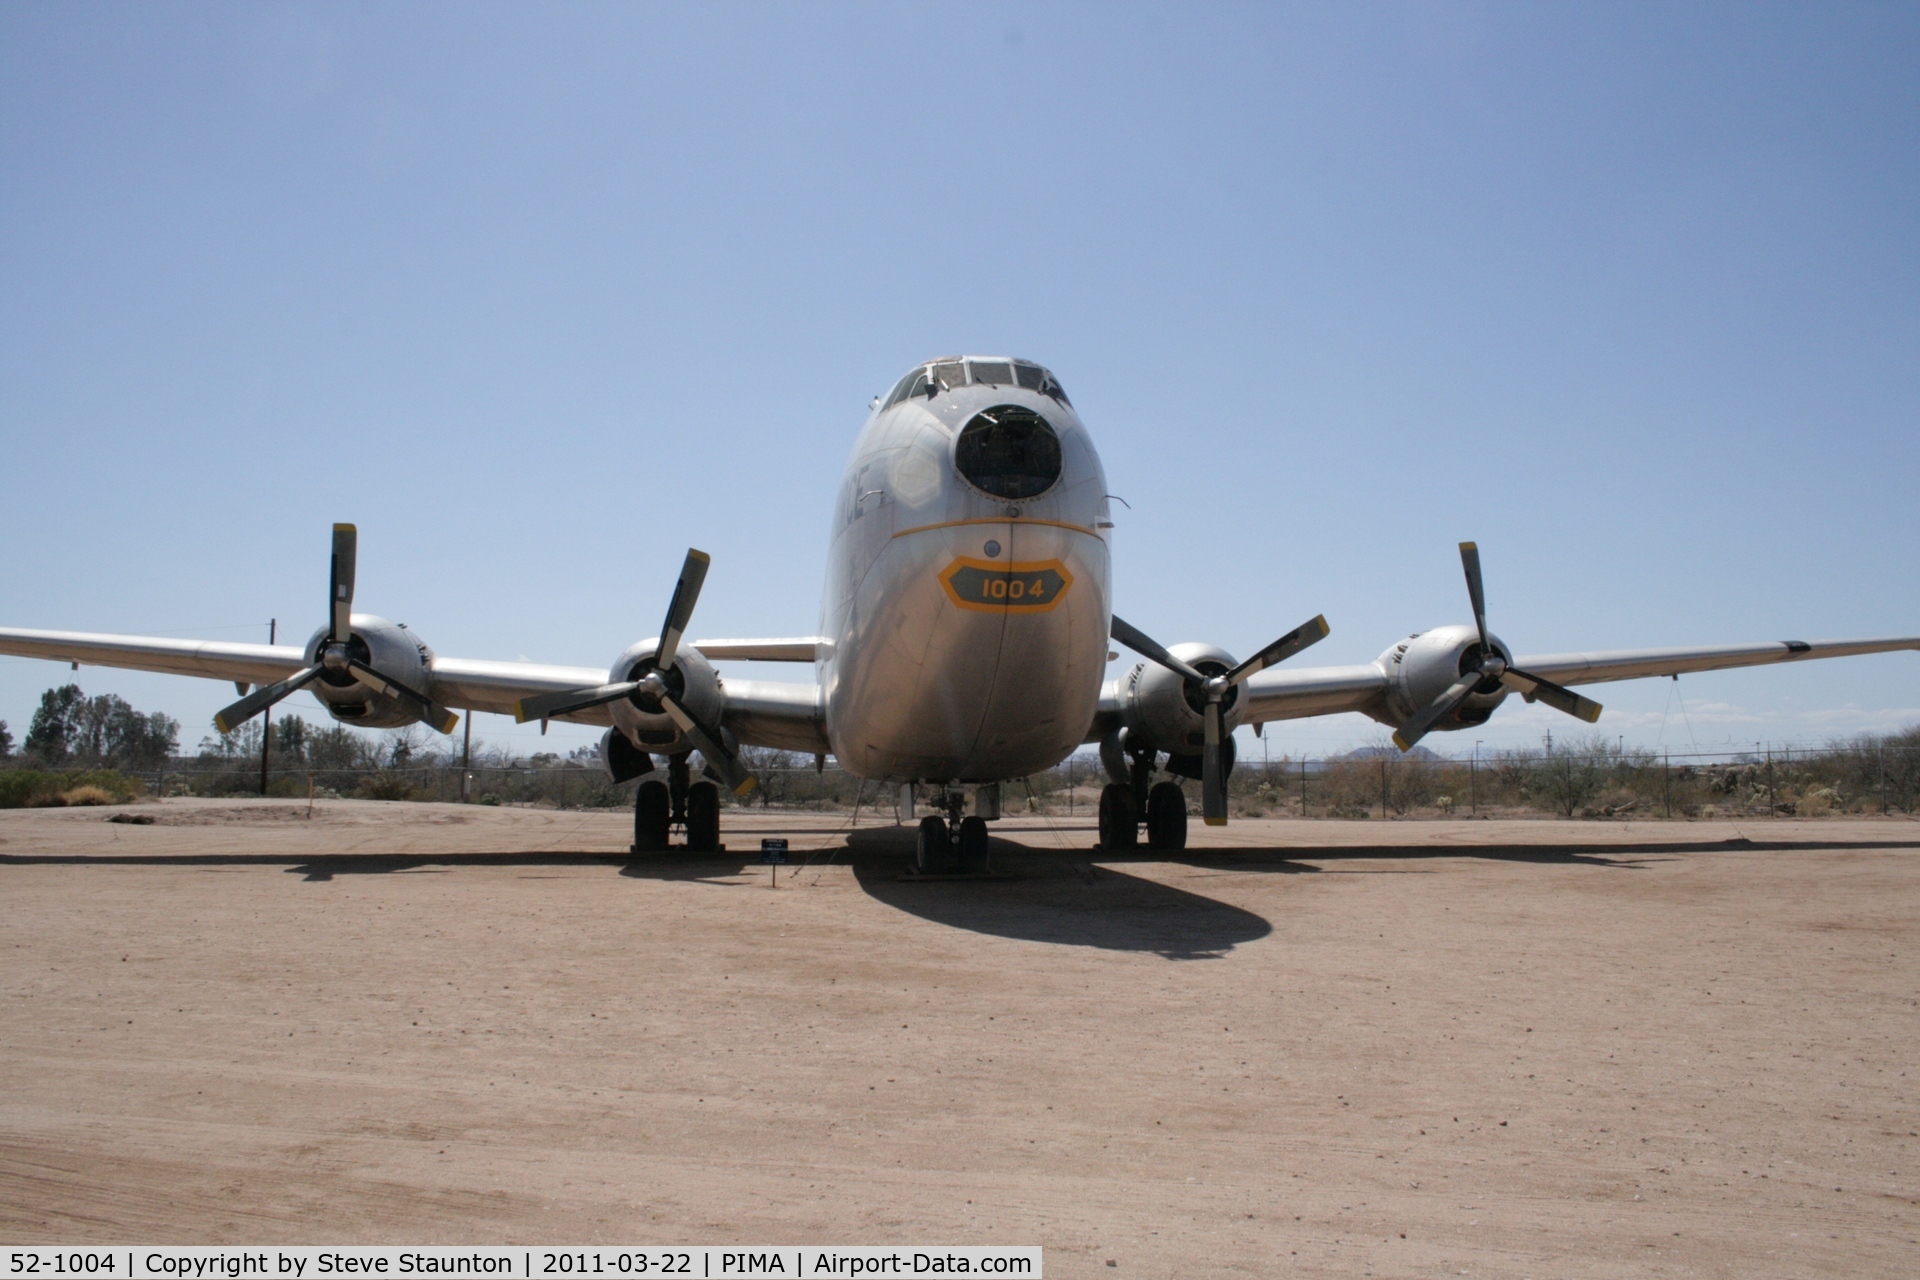 52-1004, 1952 Douglas C-124C Globemaster II C/N 43913, Taken at Pima Air and Space Museum, in March 2011 whilst on an Aeroprint Aviation tour